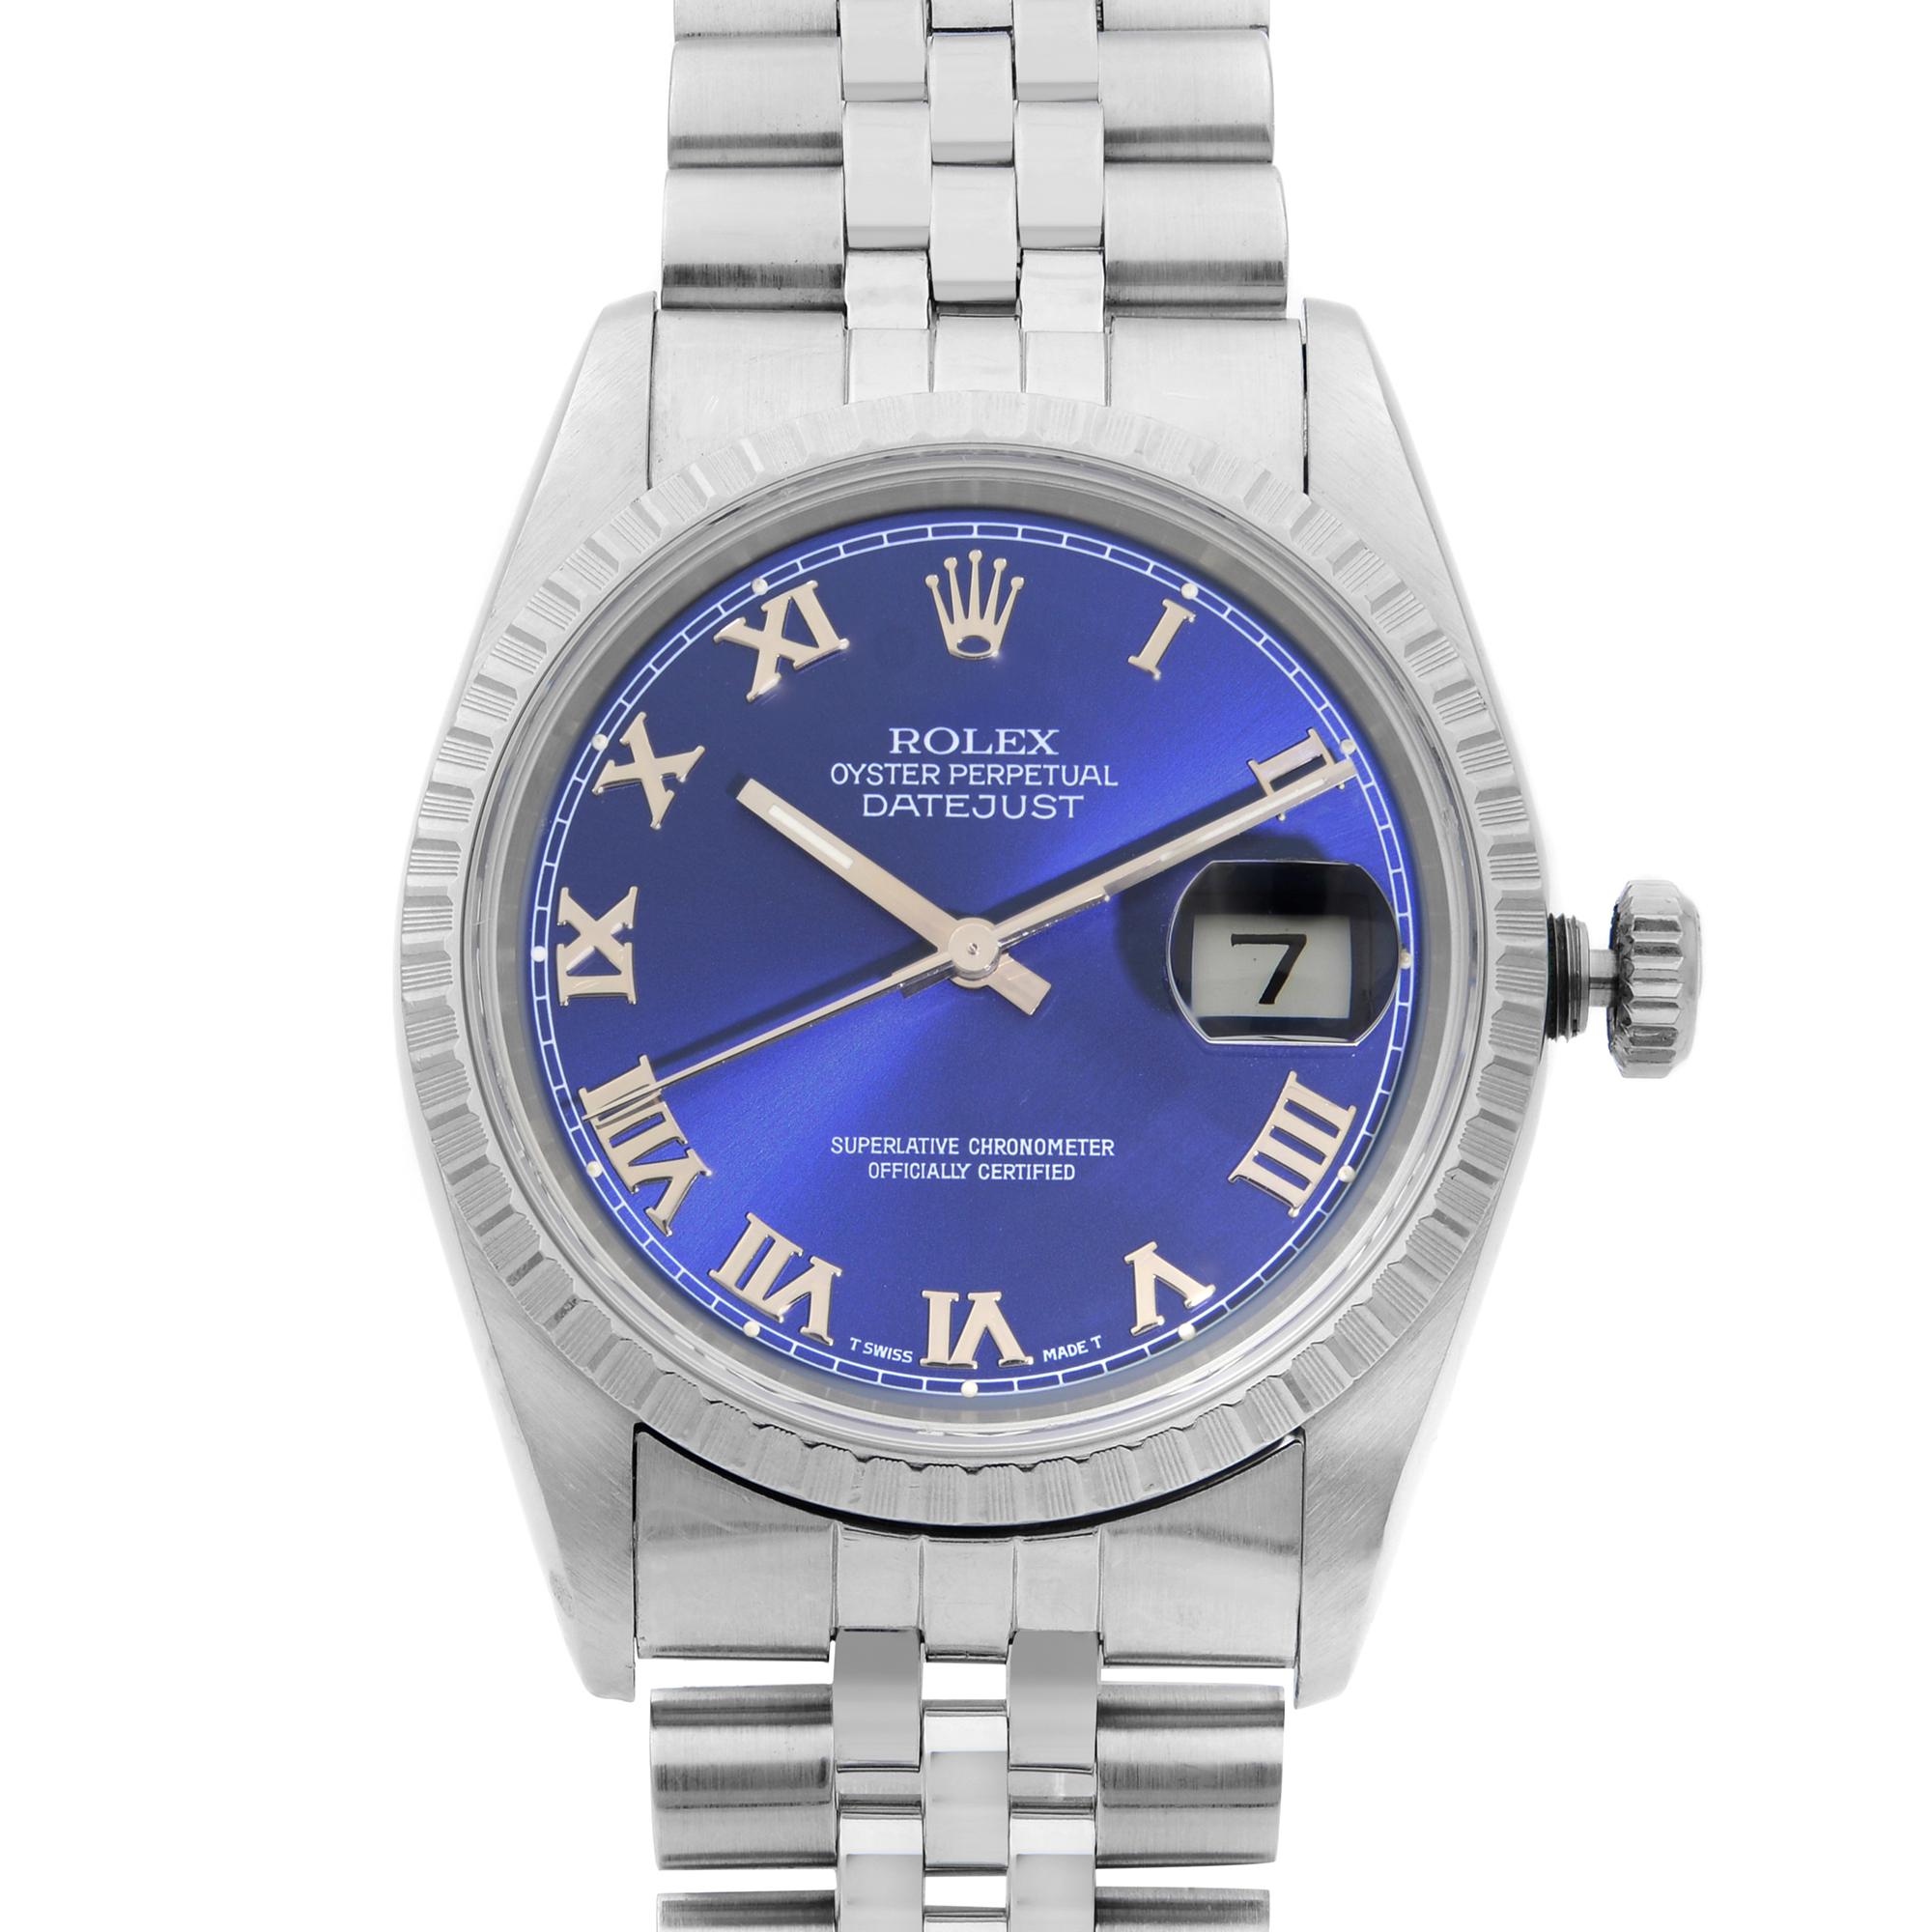 This pre-owned Rolex Datejust 16220 is a beautiful men's timepiece that is powered by mechanical (automatic) movement which is cased in a stainless steel case. It has a round shape face, date indicator dial and has hand roman numerals style markers.